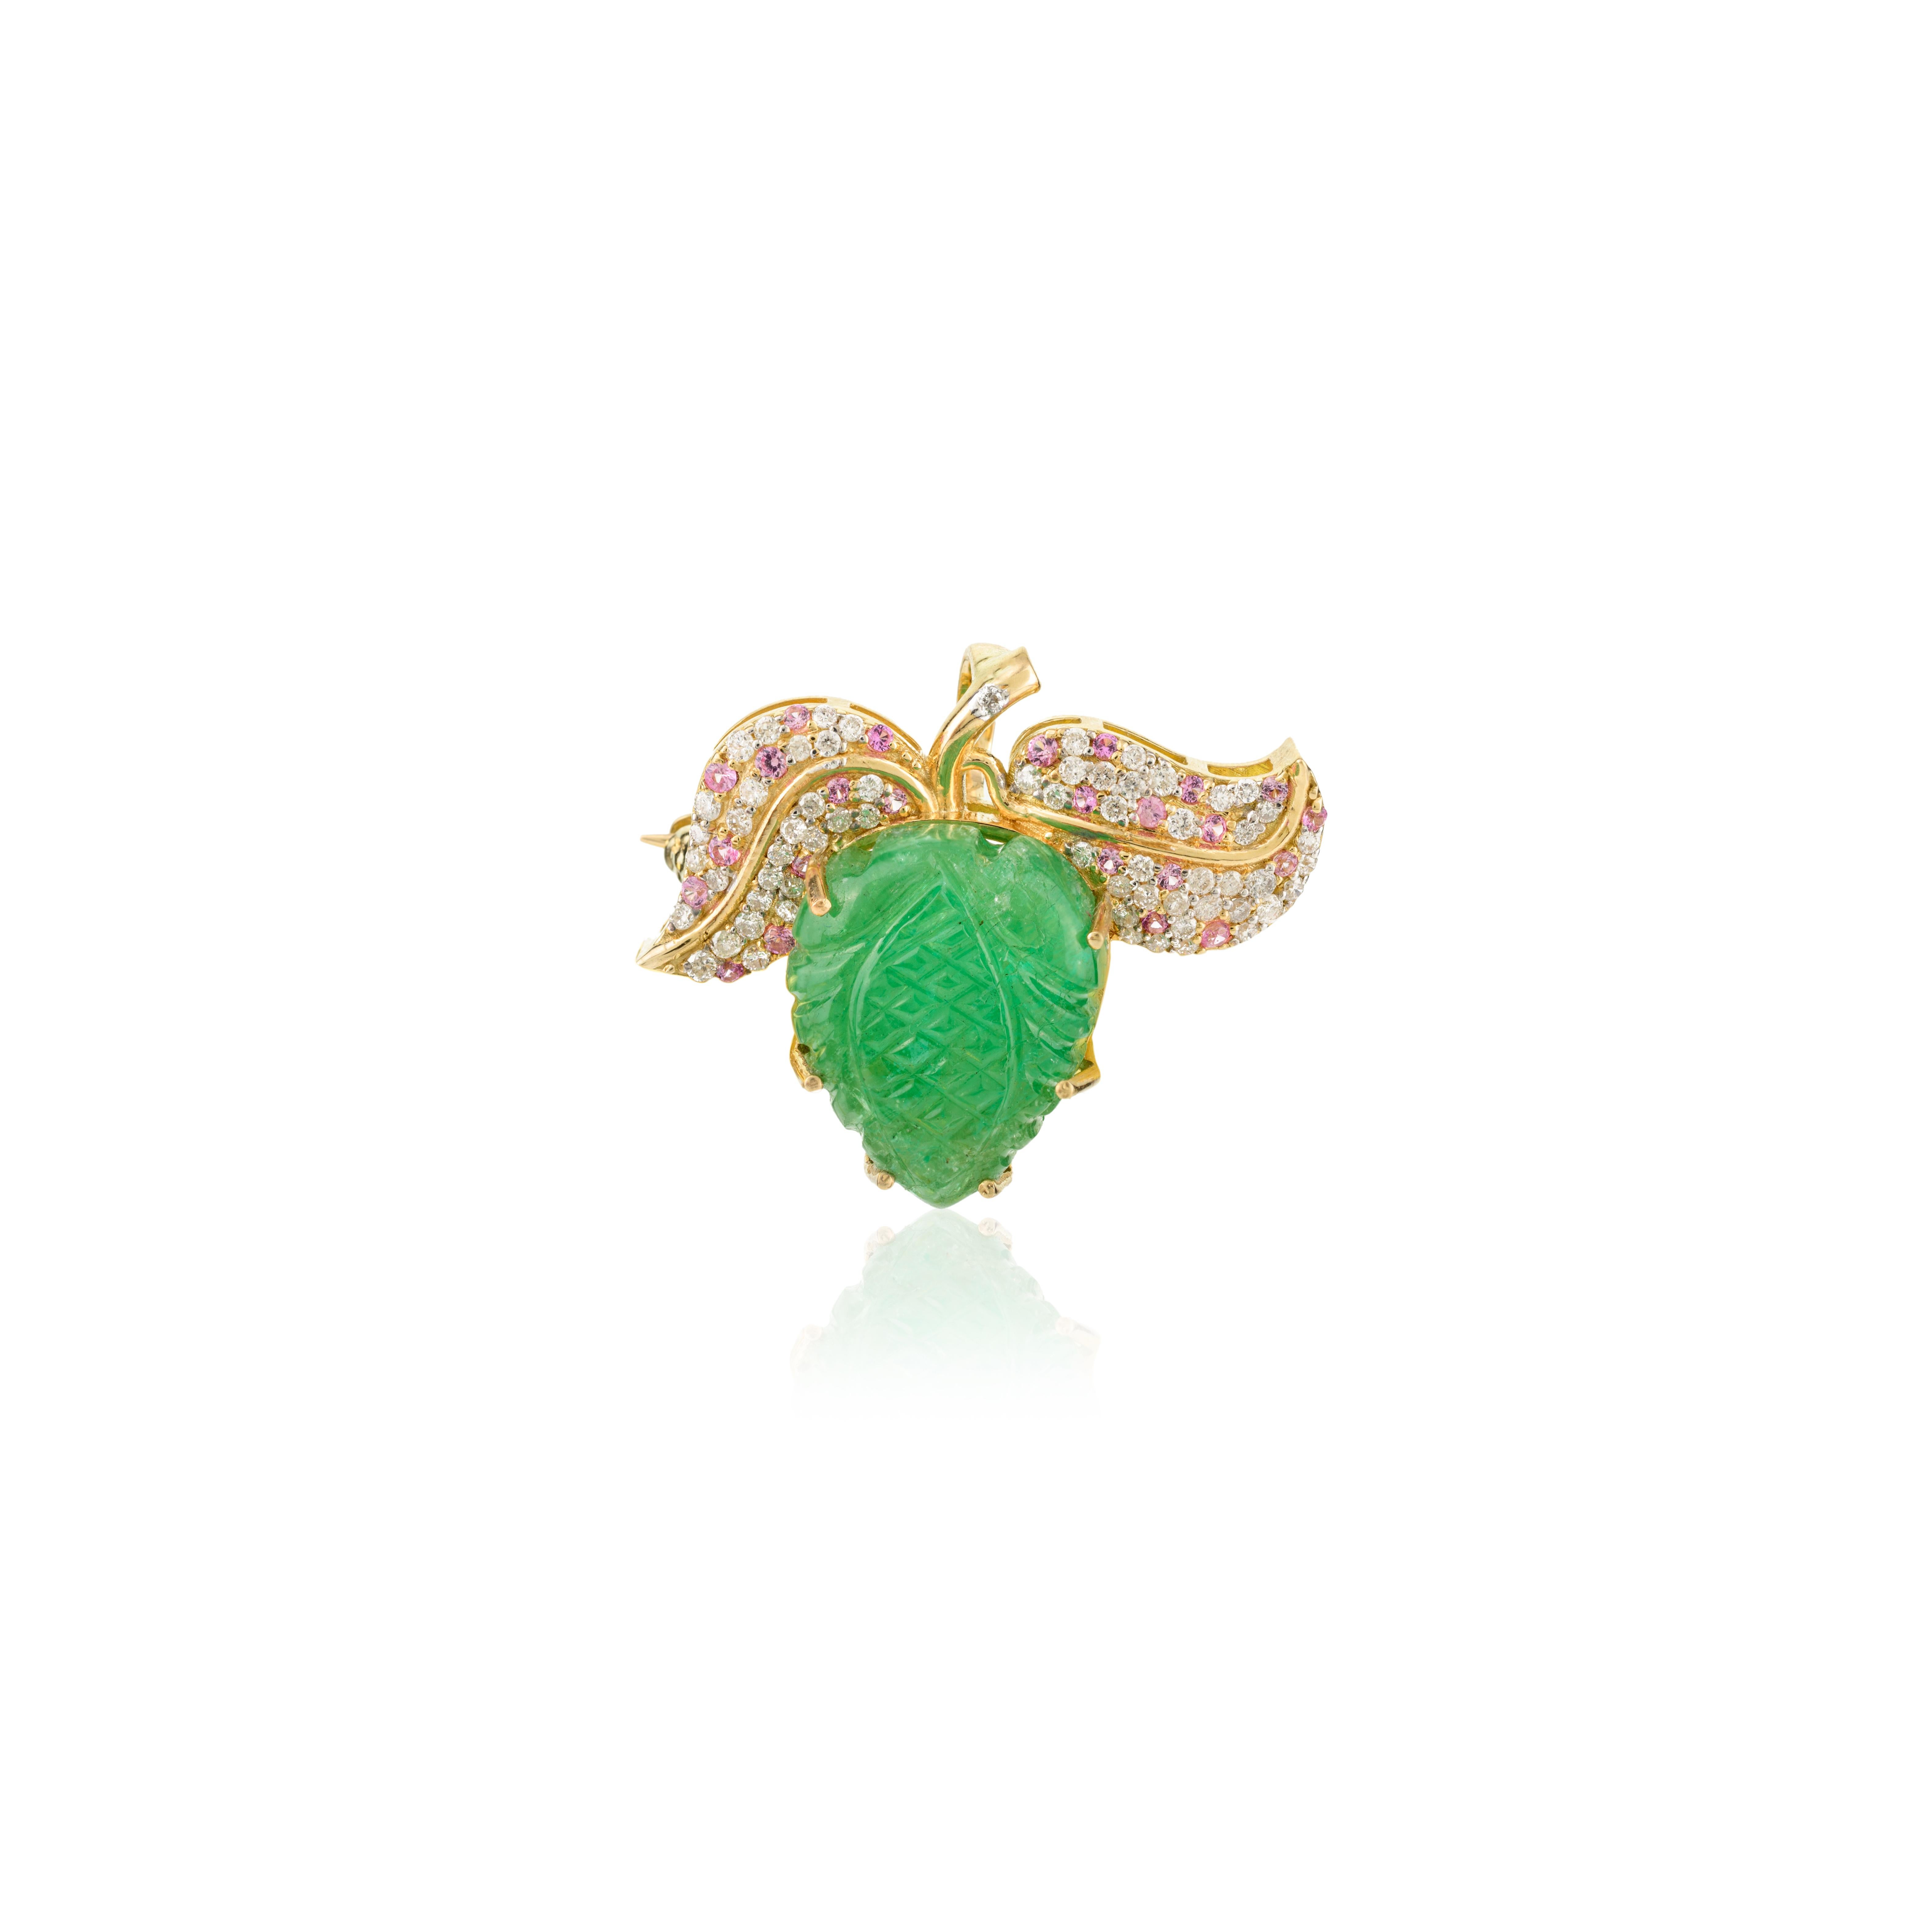 Unisex 8.88 Carat Carved Emerald Diamond Leaf Brooch Pin Gift in 18k Yellow Gold For Sale 1